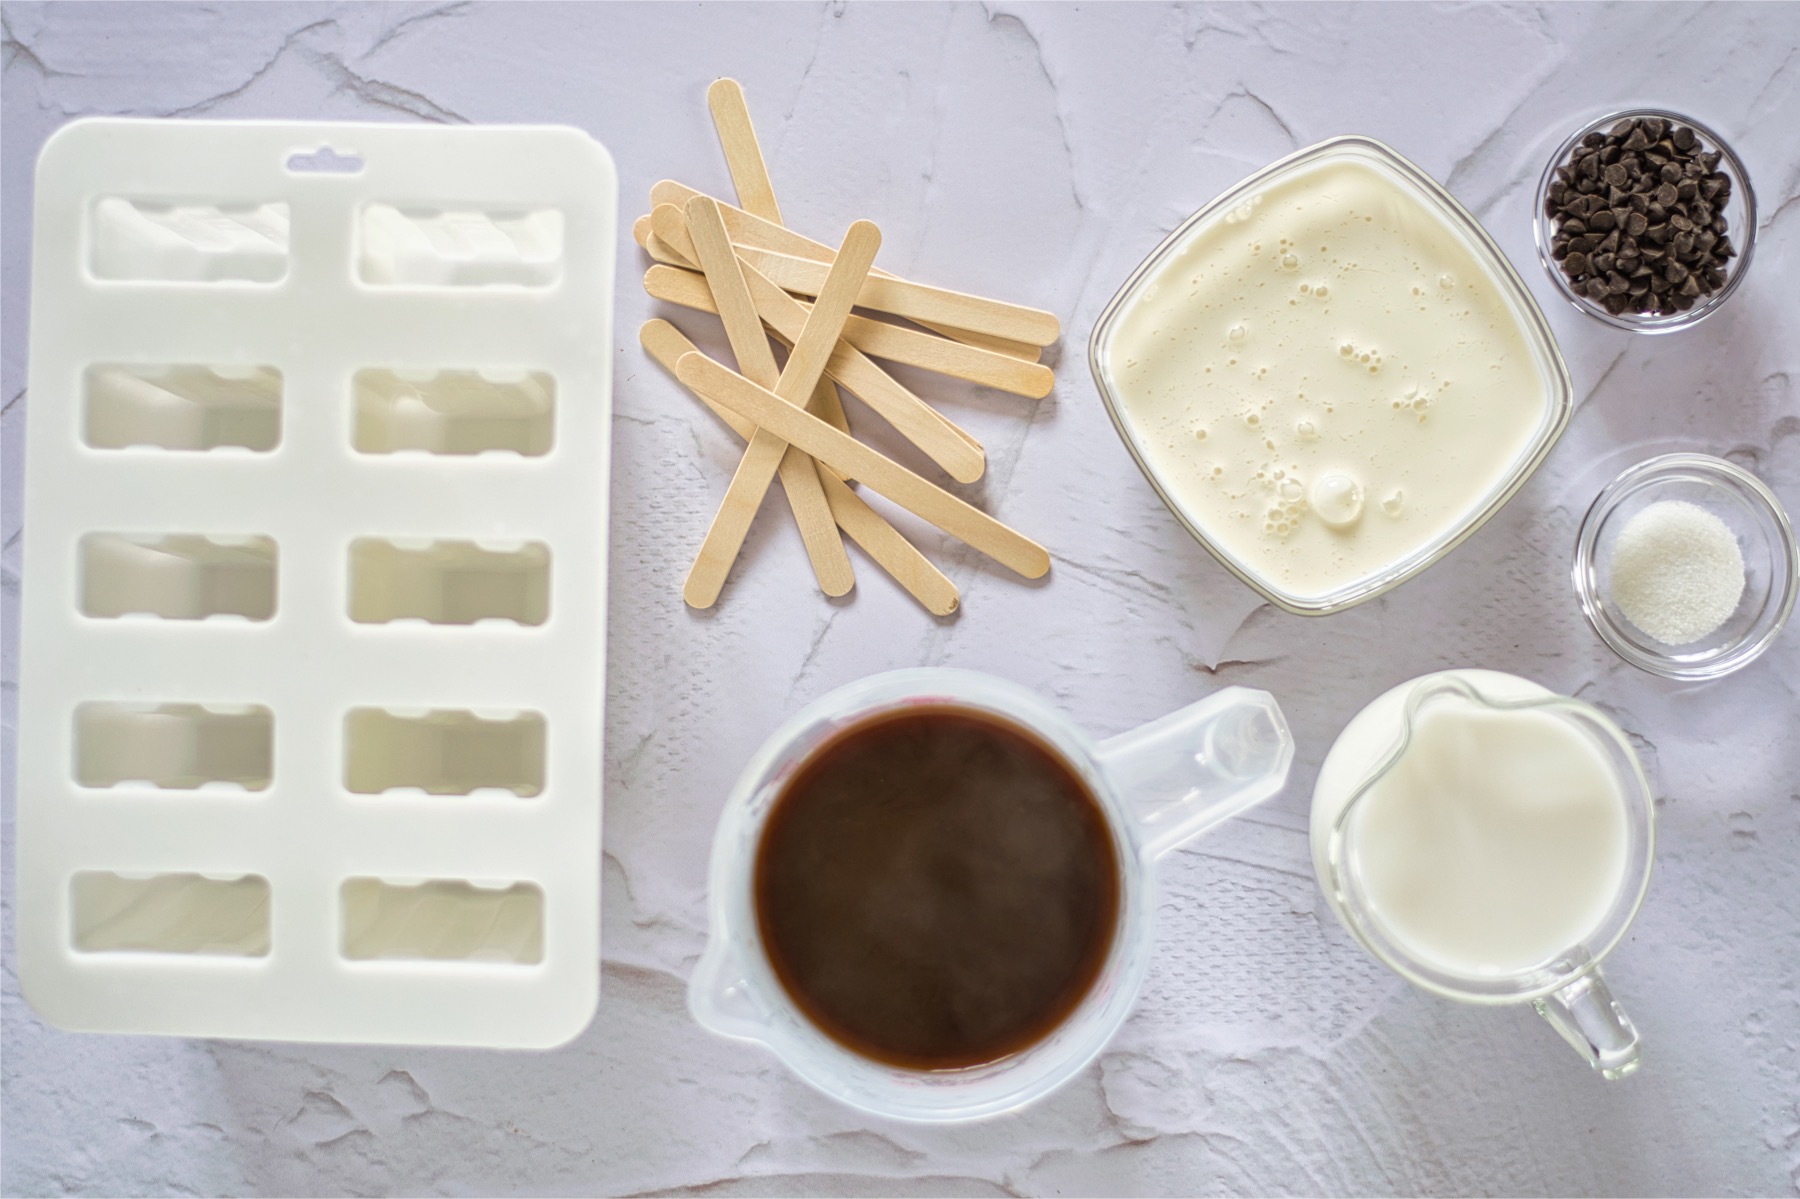 ingredients to make layered iced coffee popsicles